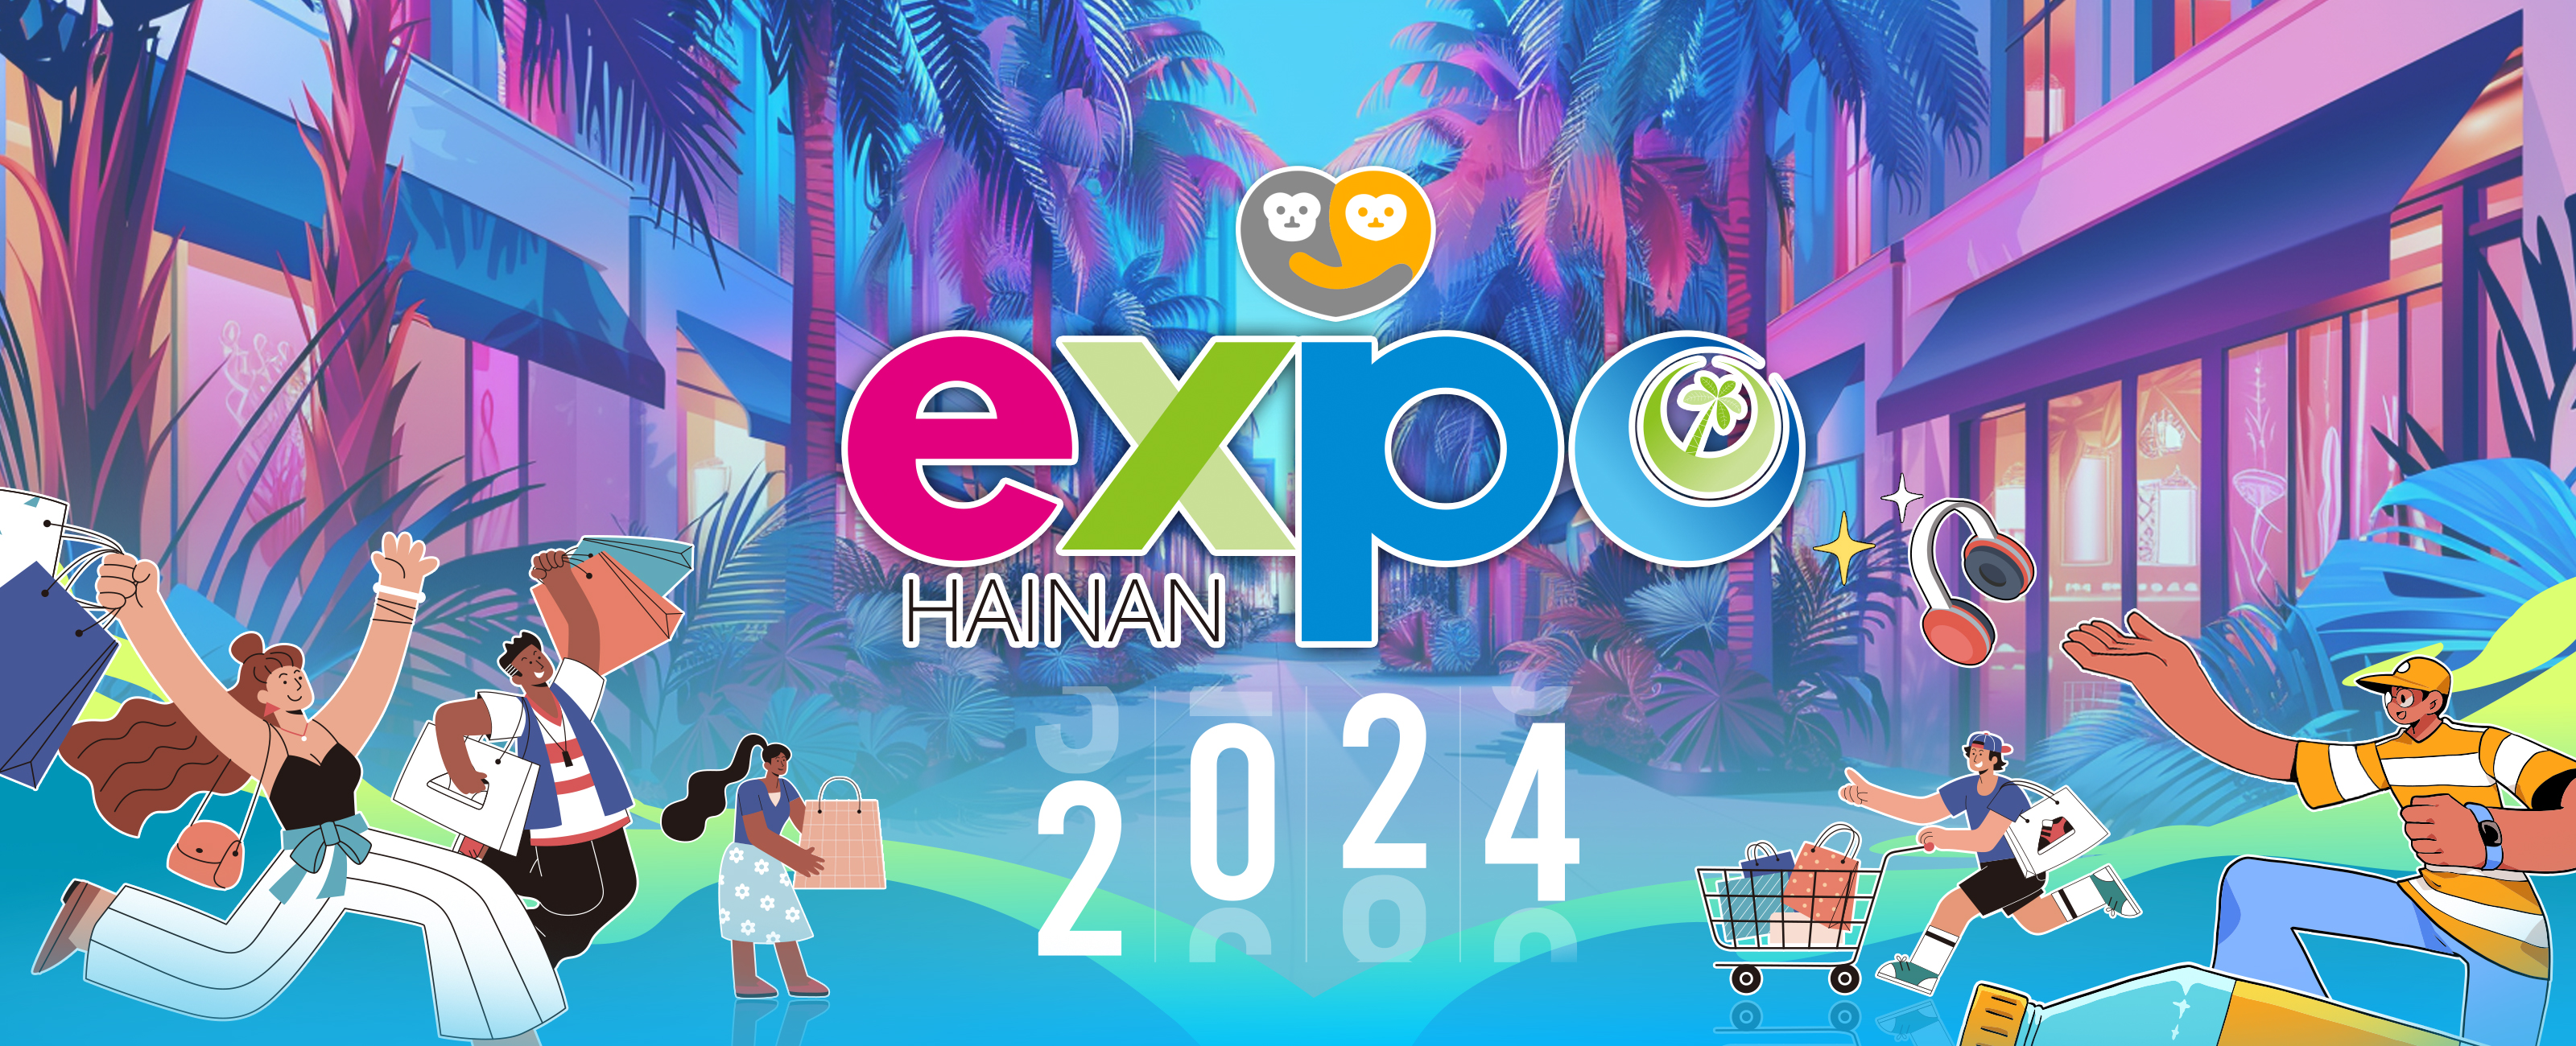 banner of the report of hainan expo 2024